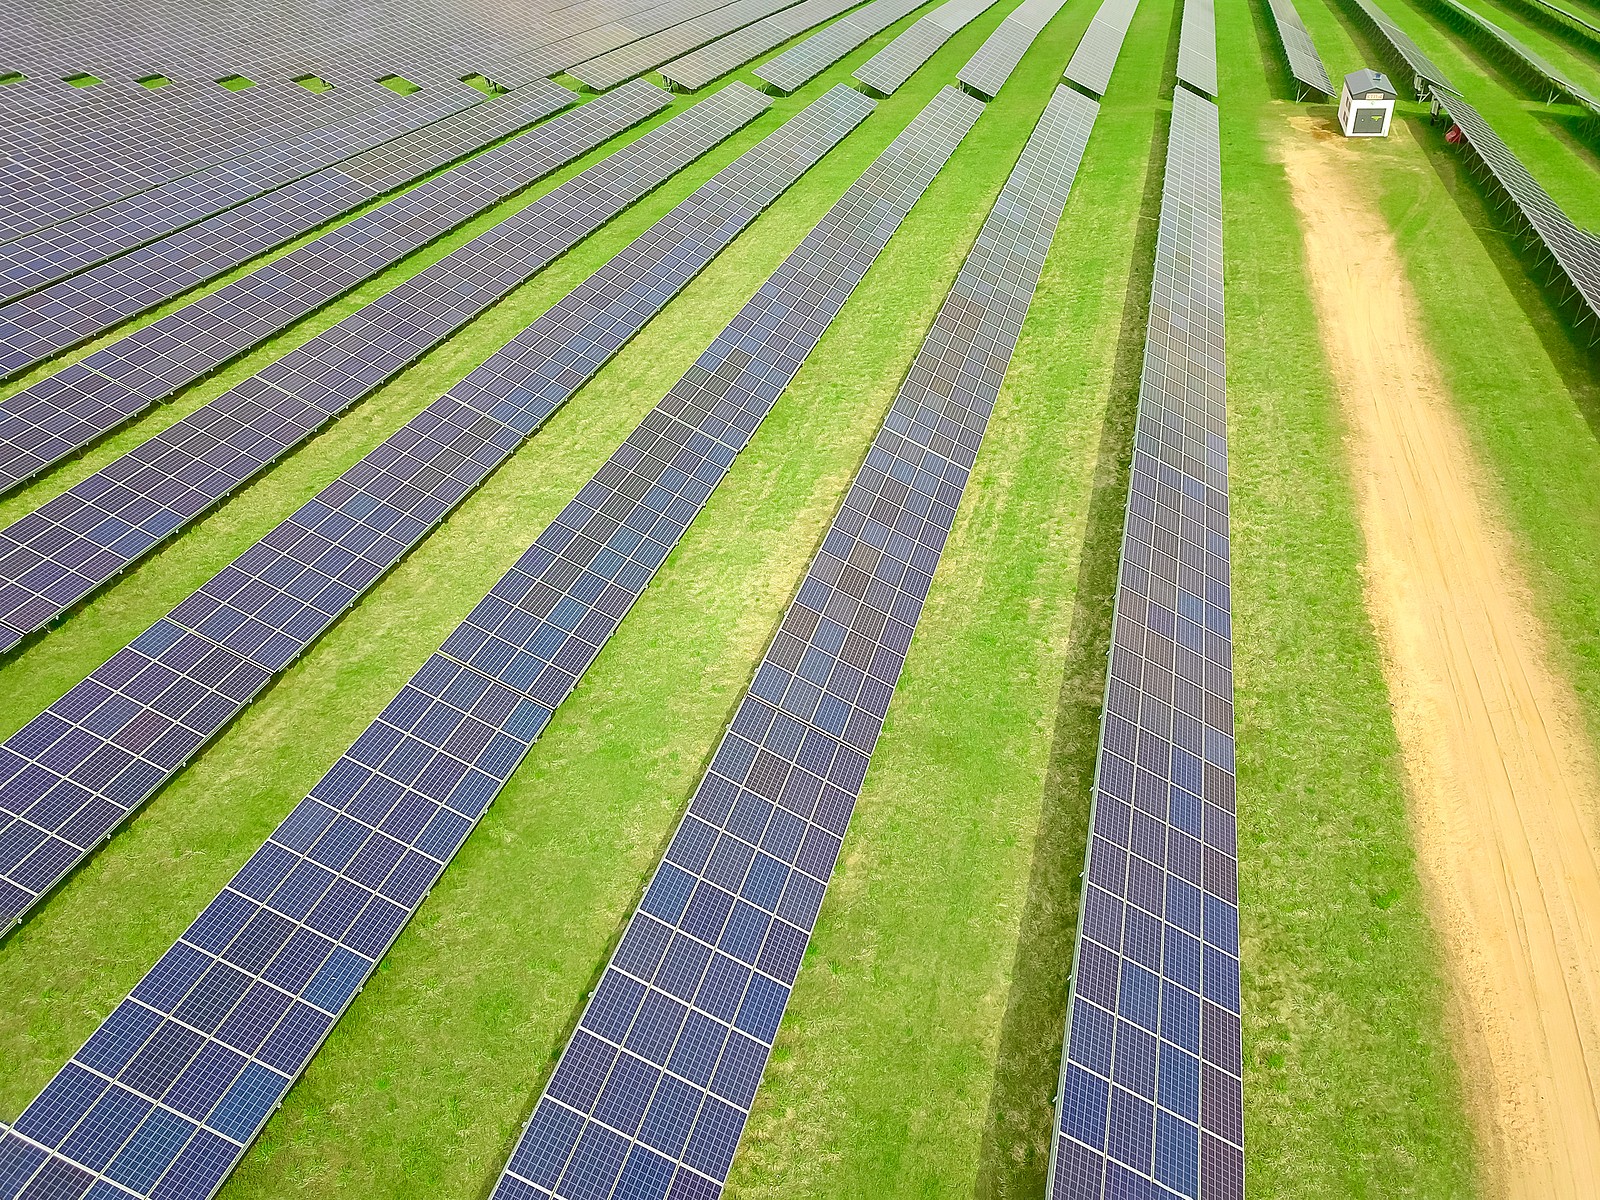 Aerial view of long rows of solar panels in a solar farm on green land.